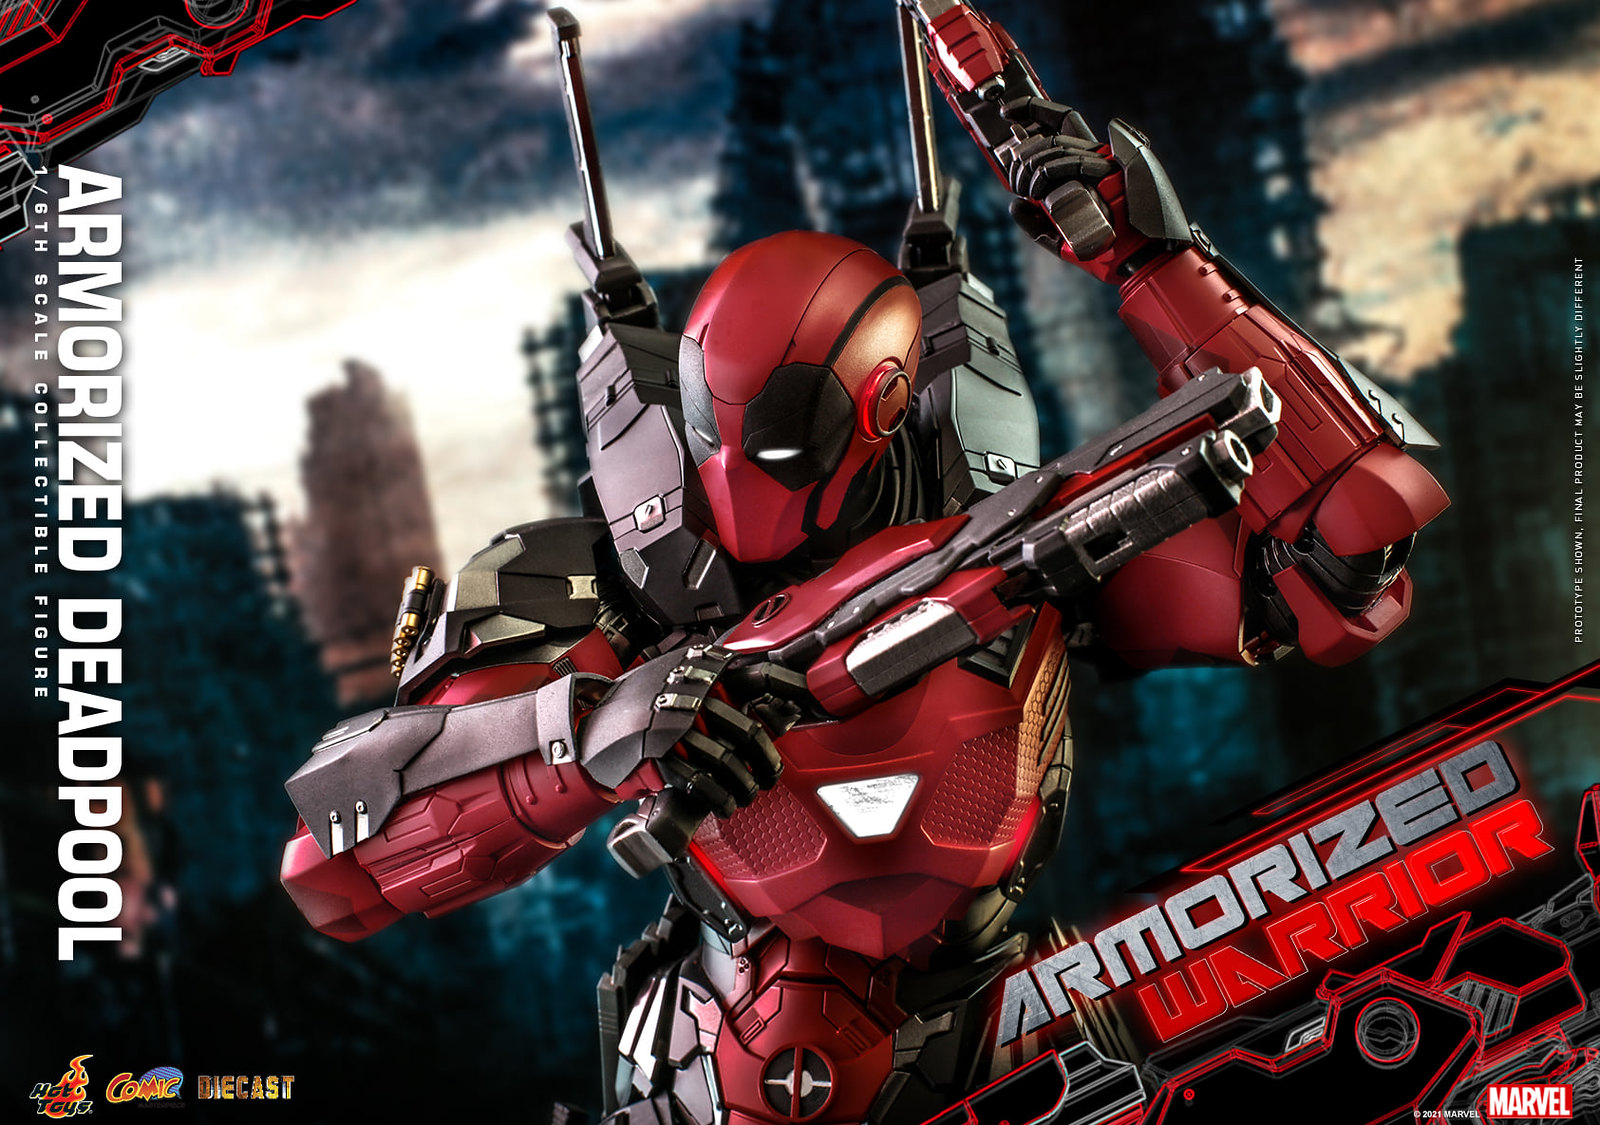 NEW PRODUCT: Hot Toys Armorized Warrior - 1/6th scale Armorized Deadpool Collectible Figure [Armorized Warrior Collection] 51311242866_09d55e6ce7_h